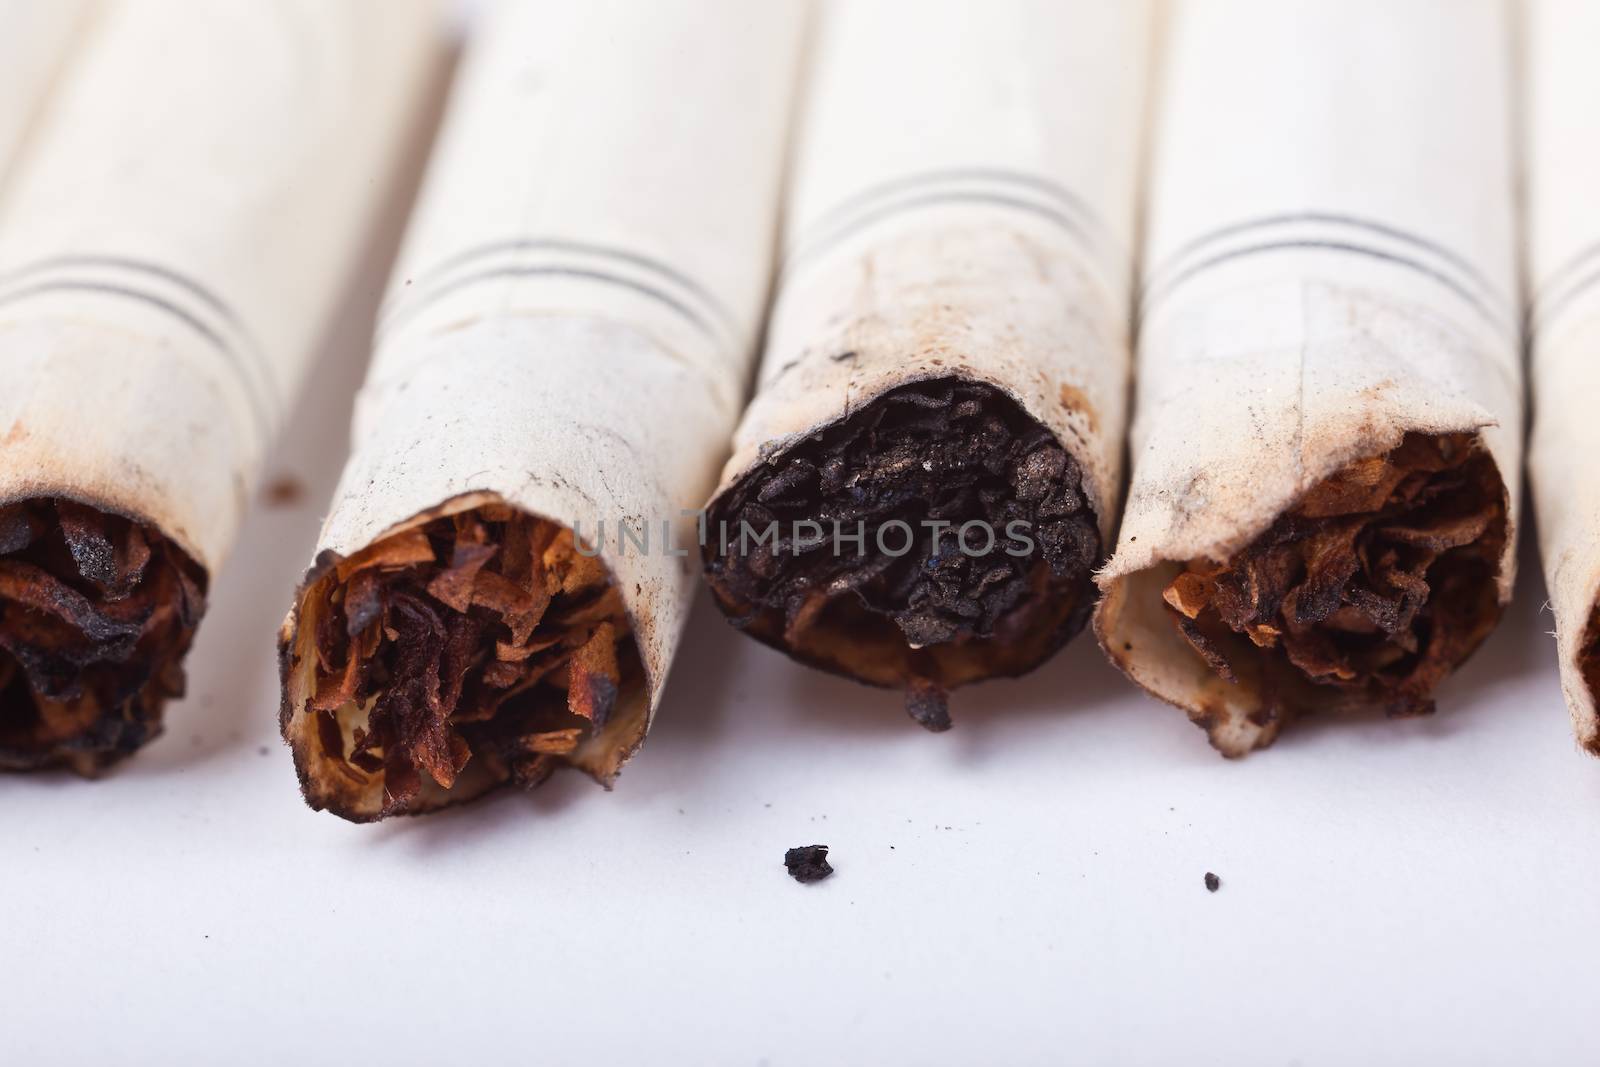 A macro shot of some cigarettes